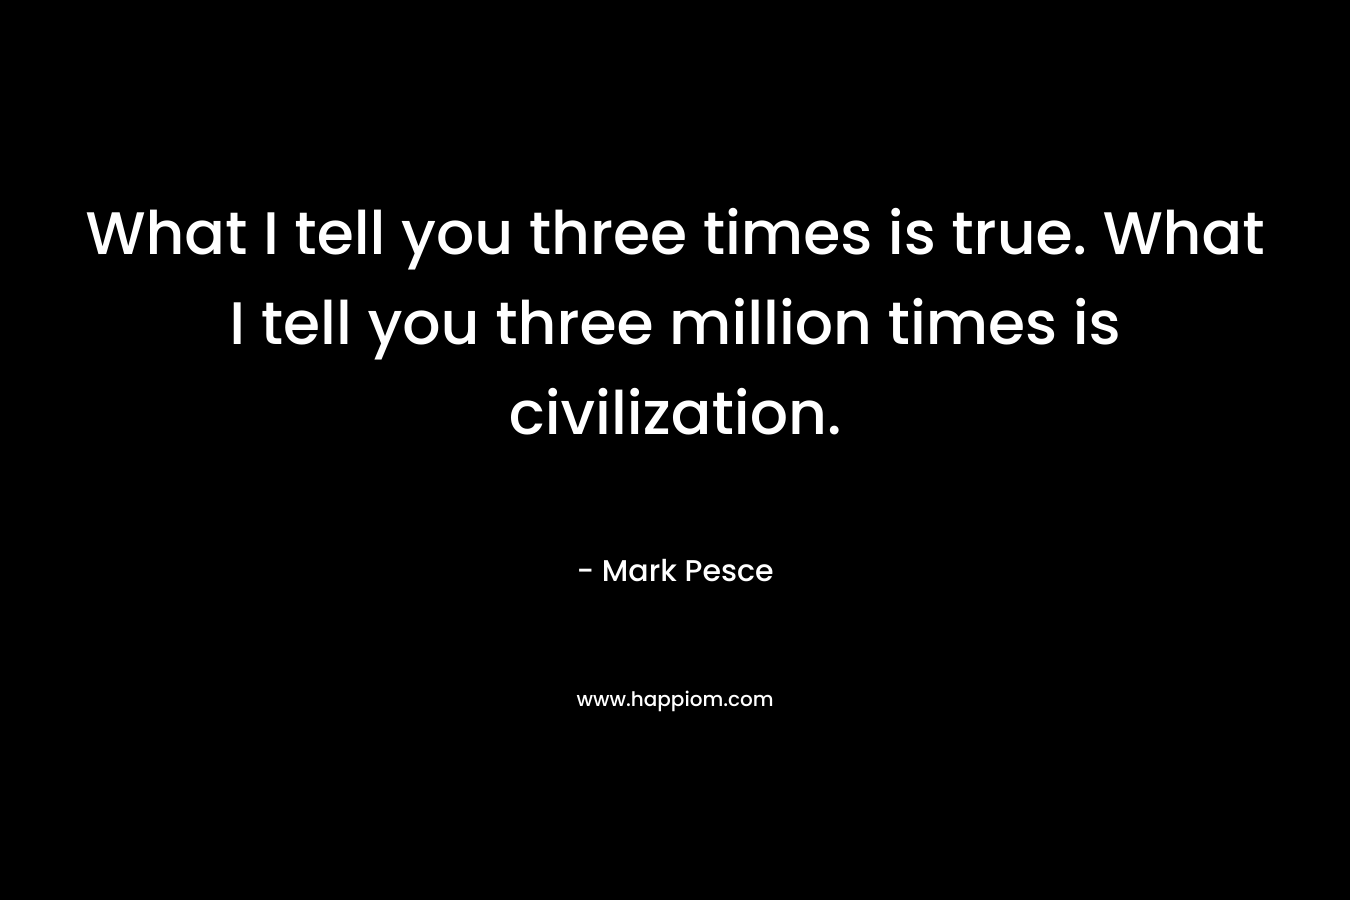 What I tell you three times is true. What I tell you three million times is civilization.